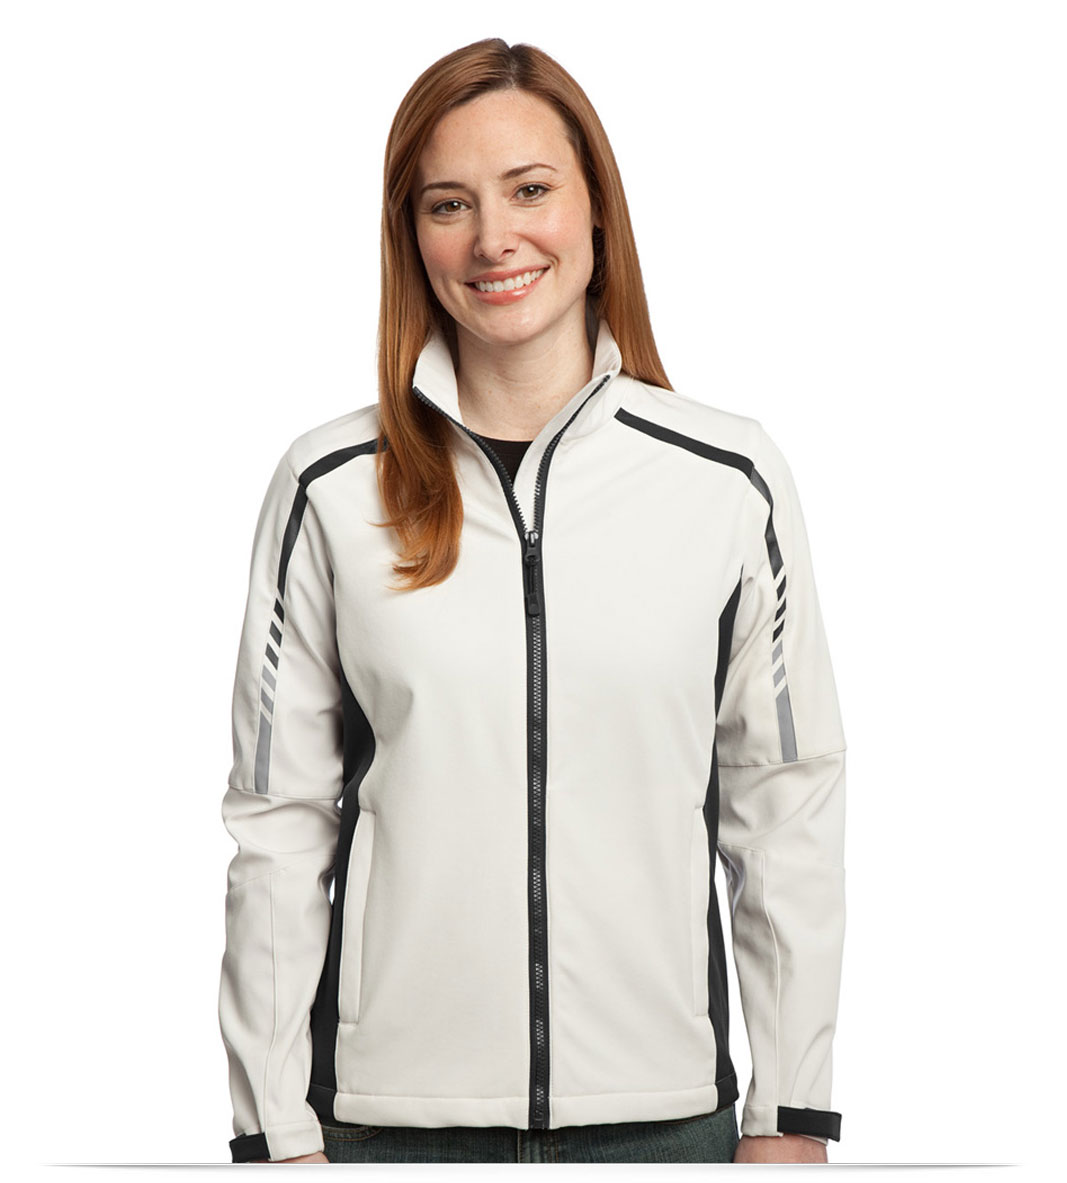 Embroidered Ladies Soft Shell Jacket